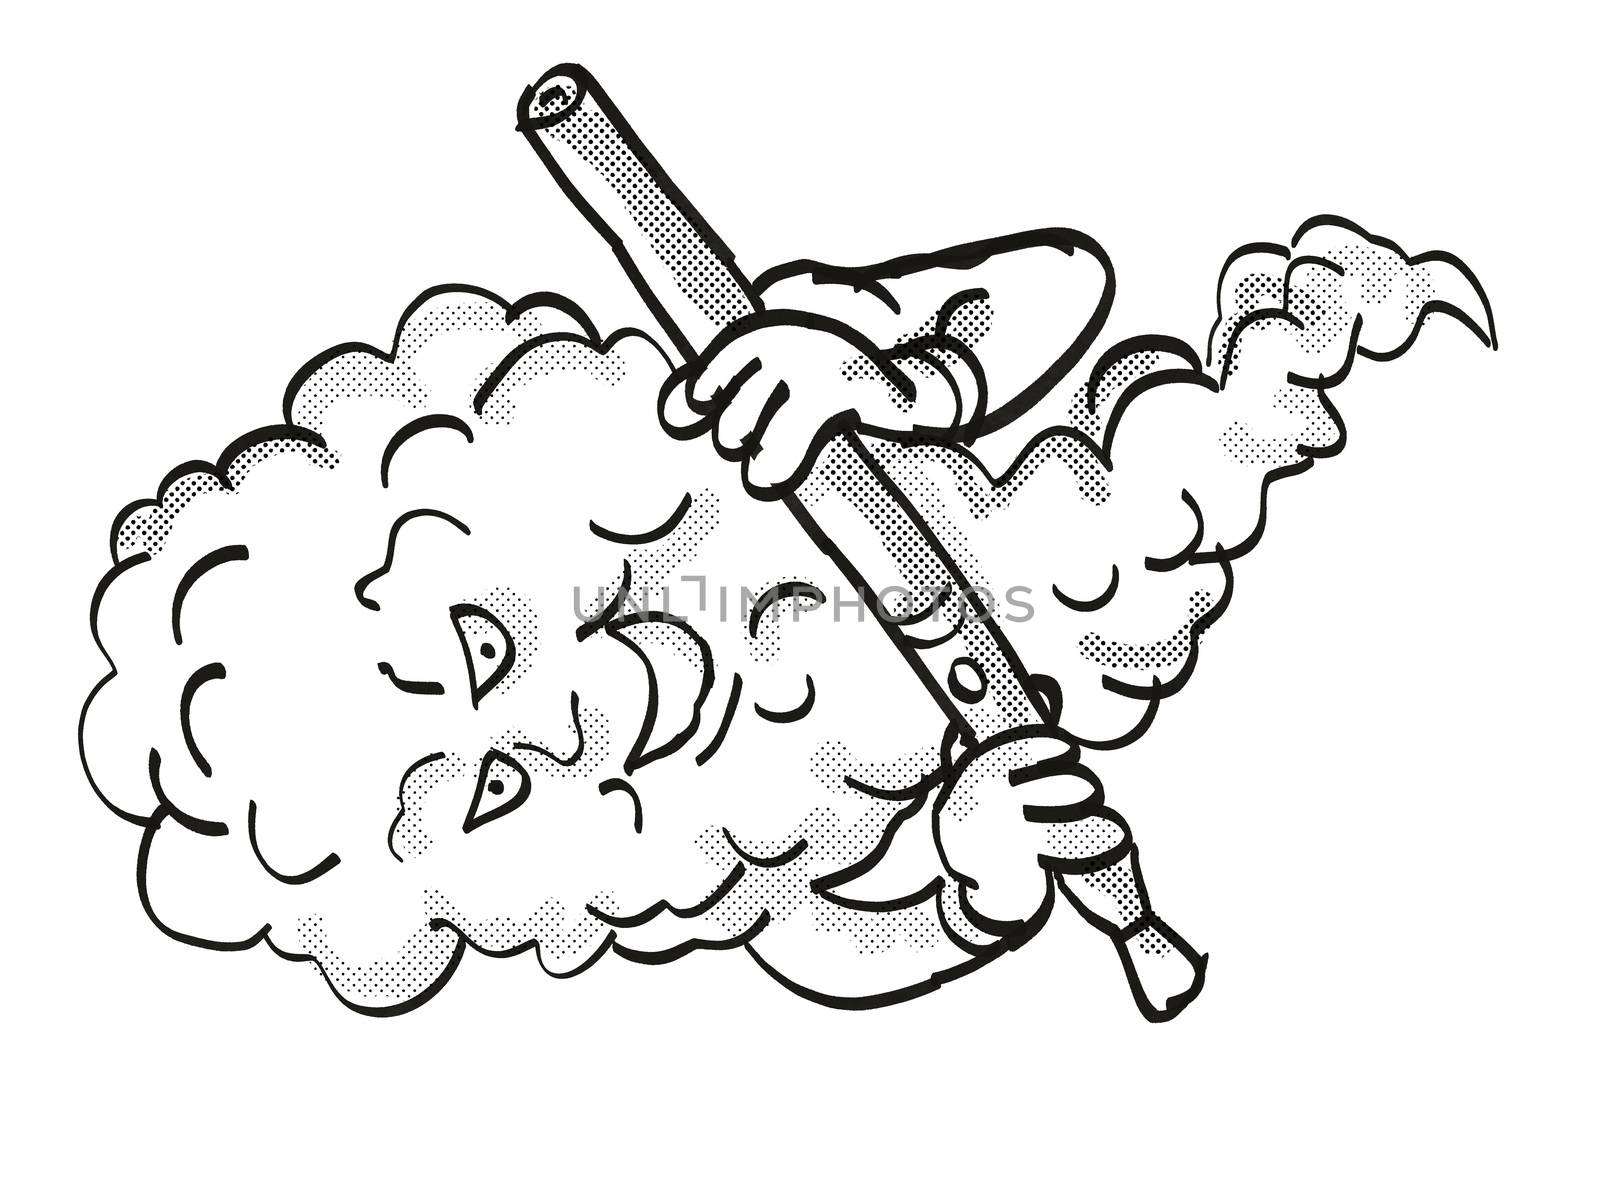 Tattoo cartoon style drawing illustration of a Vape Mascot Holding Electronic Cigarette on isolated background done in black and white.